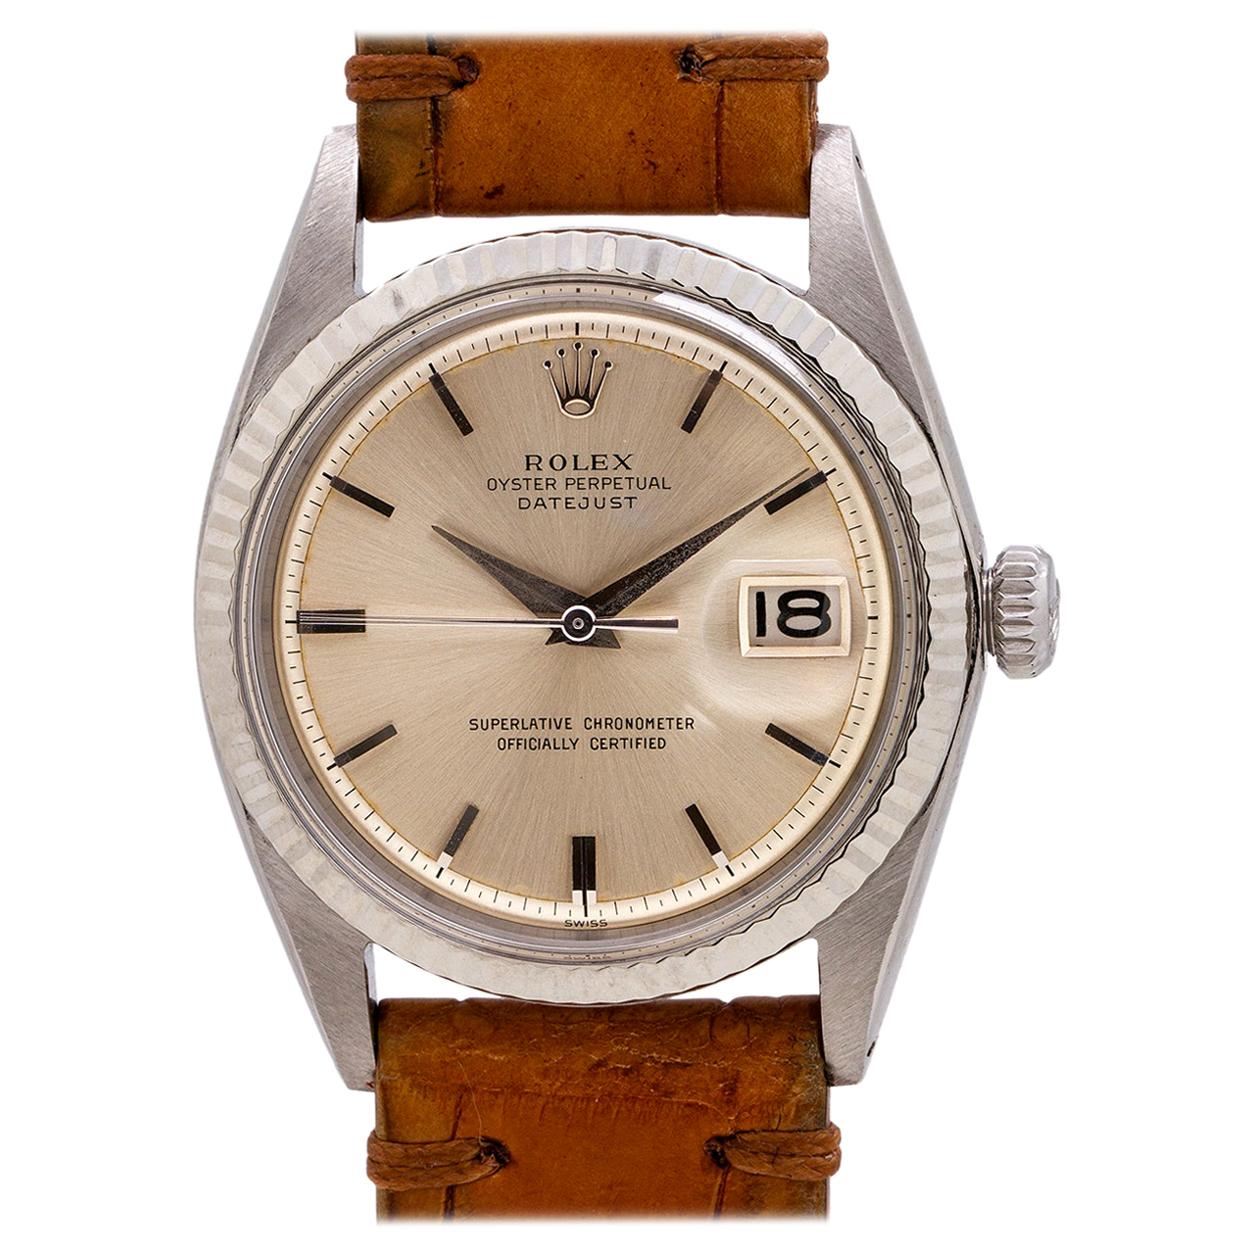 Rolex Datejust Ref# 1601 Stainless Steel and 14 Karat White Gold, circa 1962 For Sale